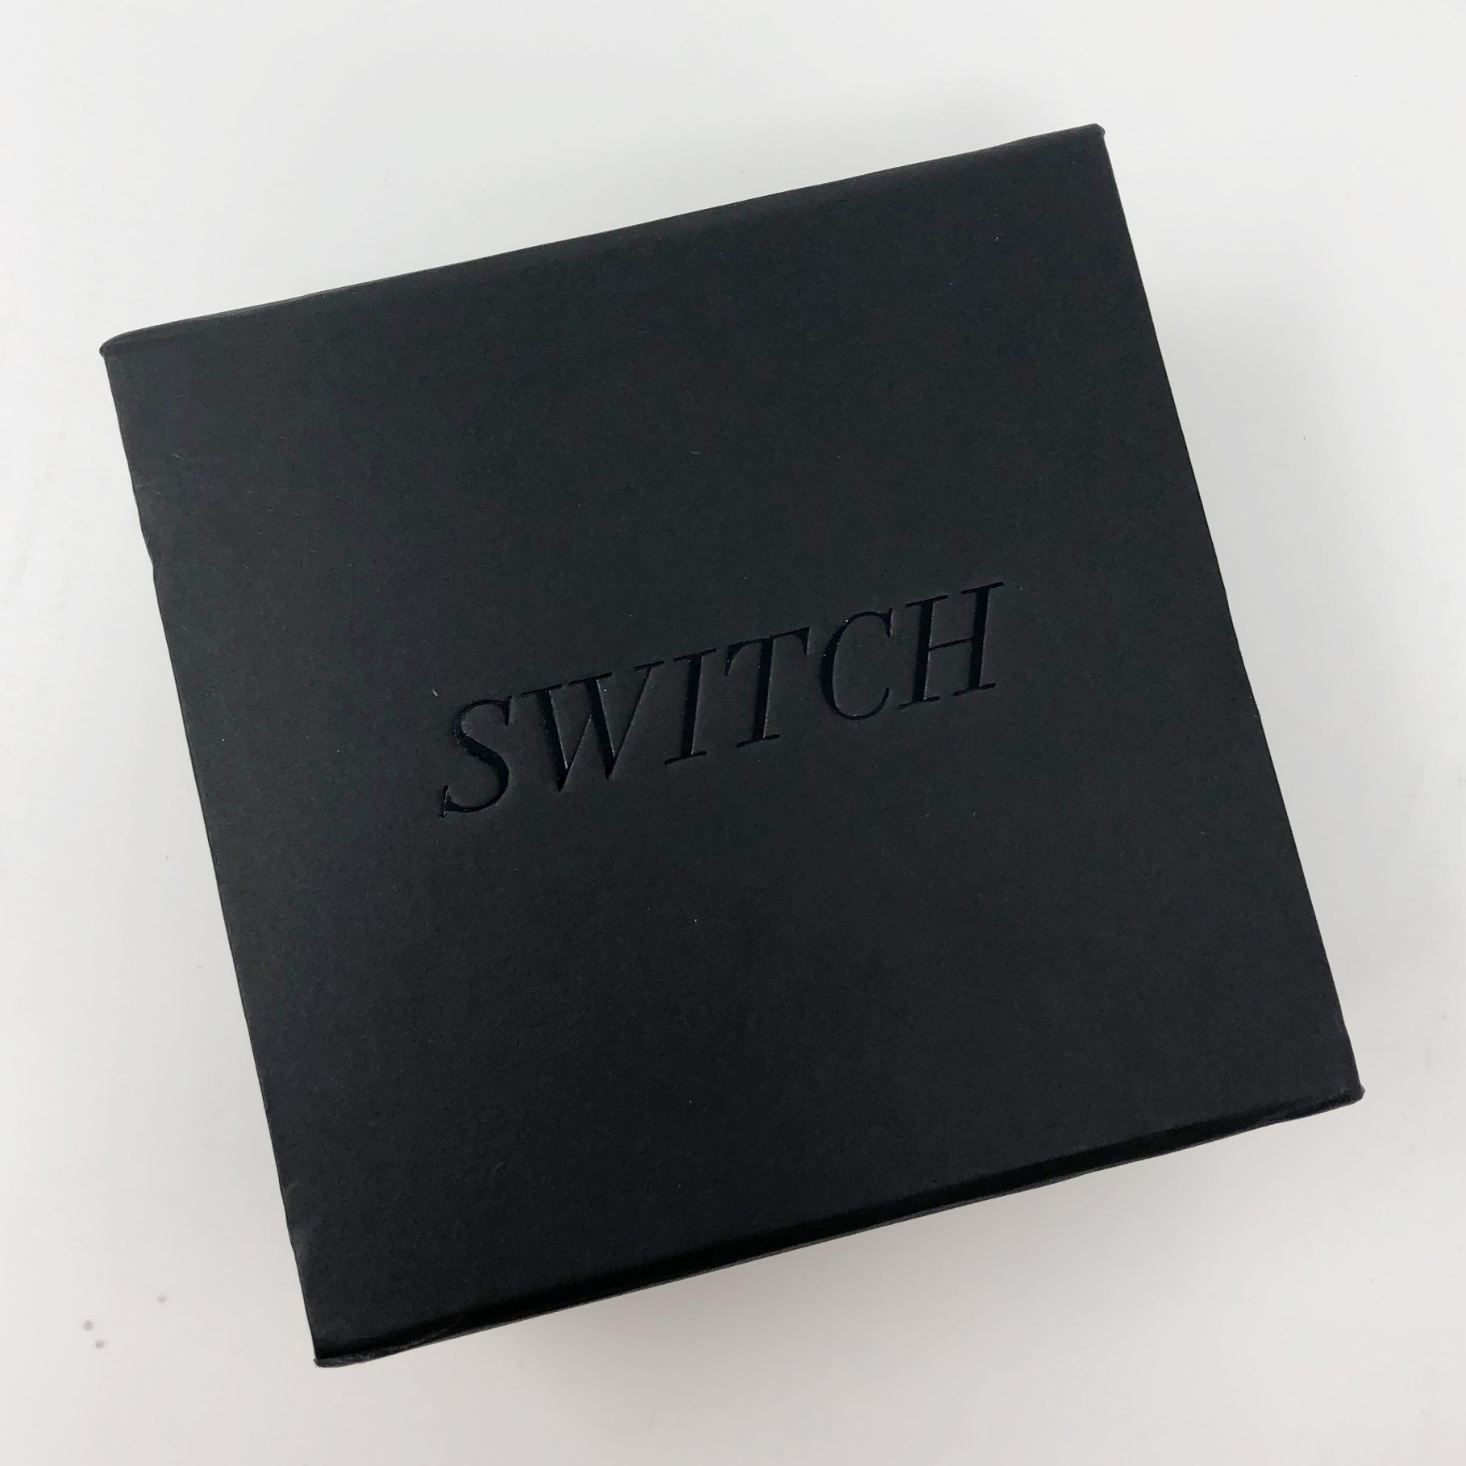 Switch Designer Jewelry Rental Review + 50% Off Coupon – November 2018